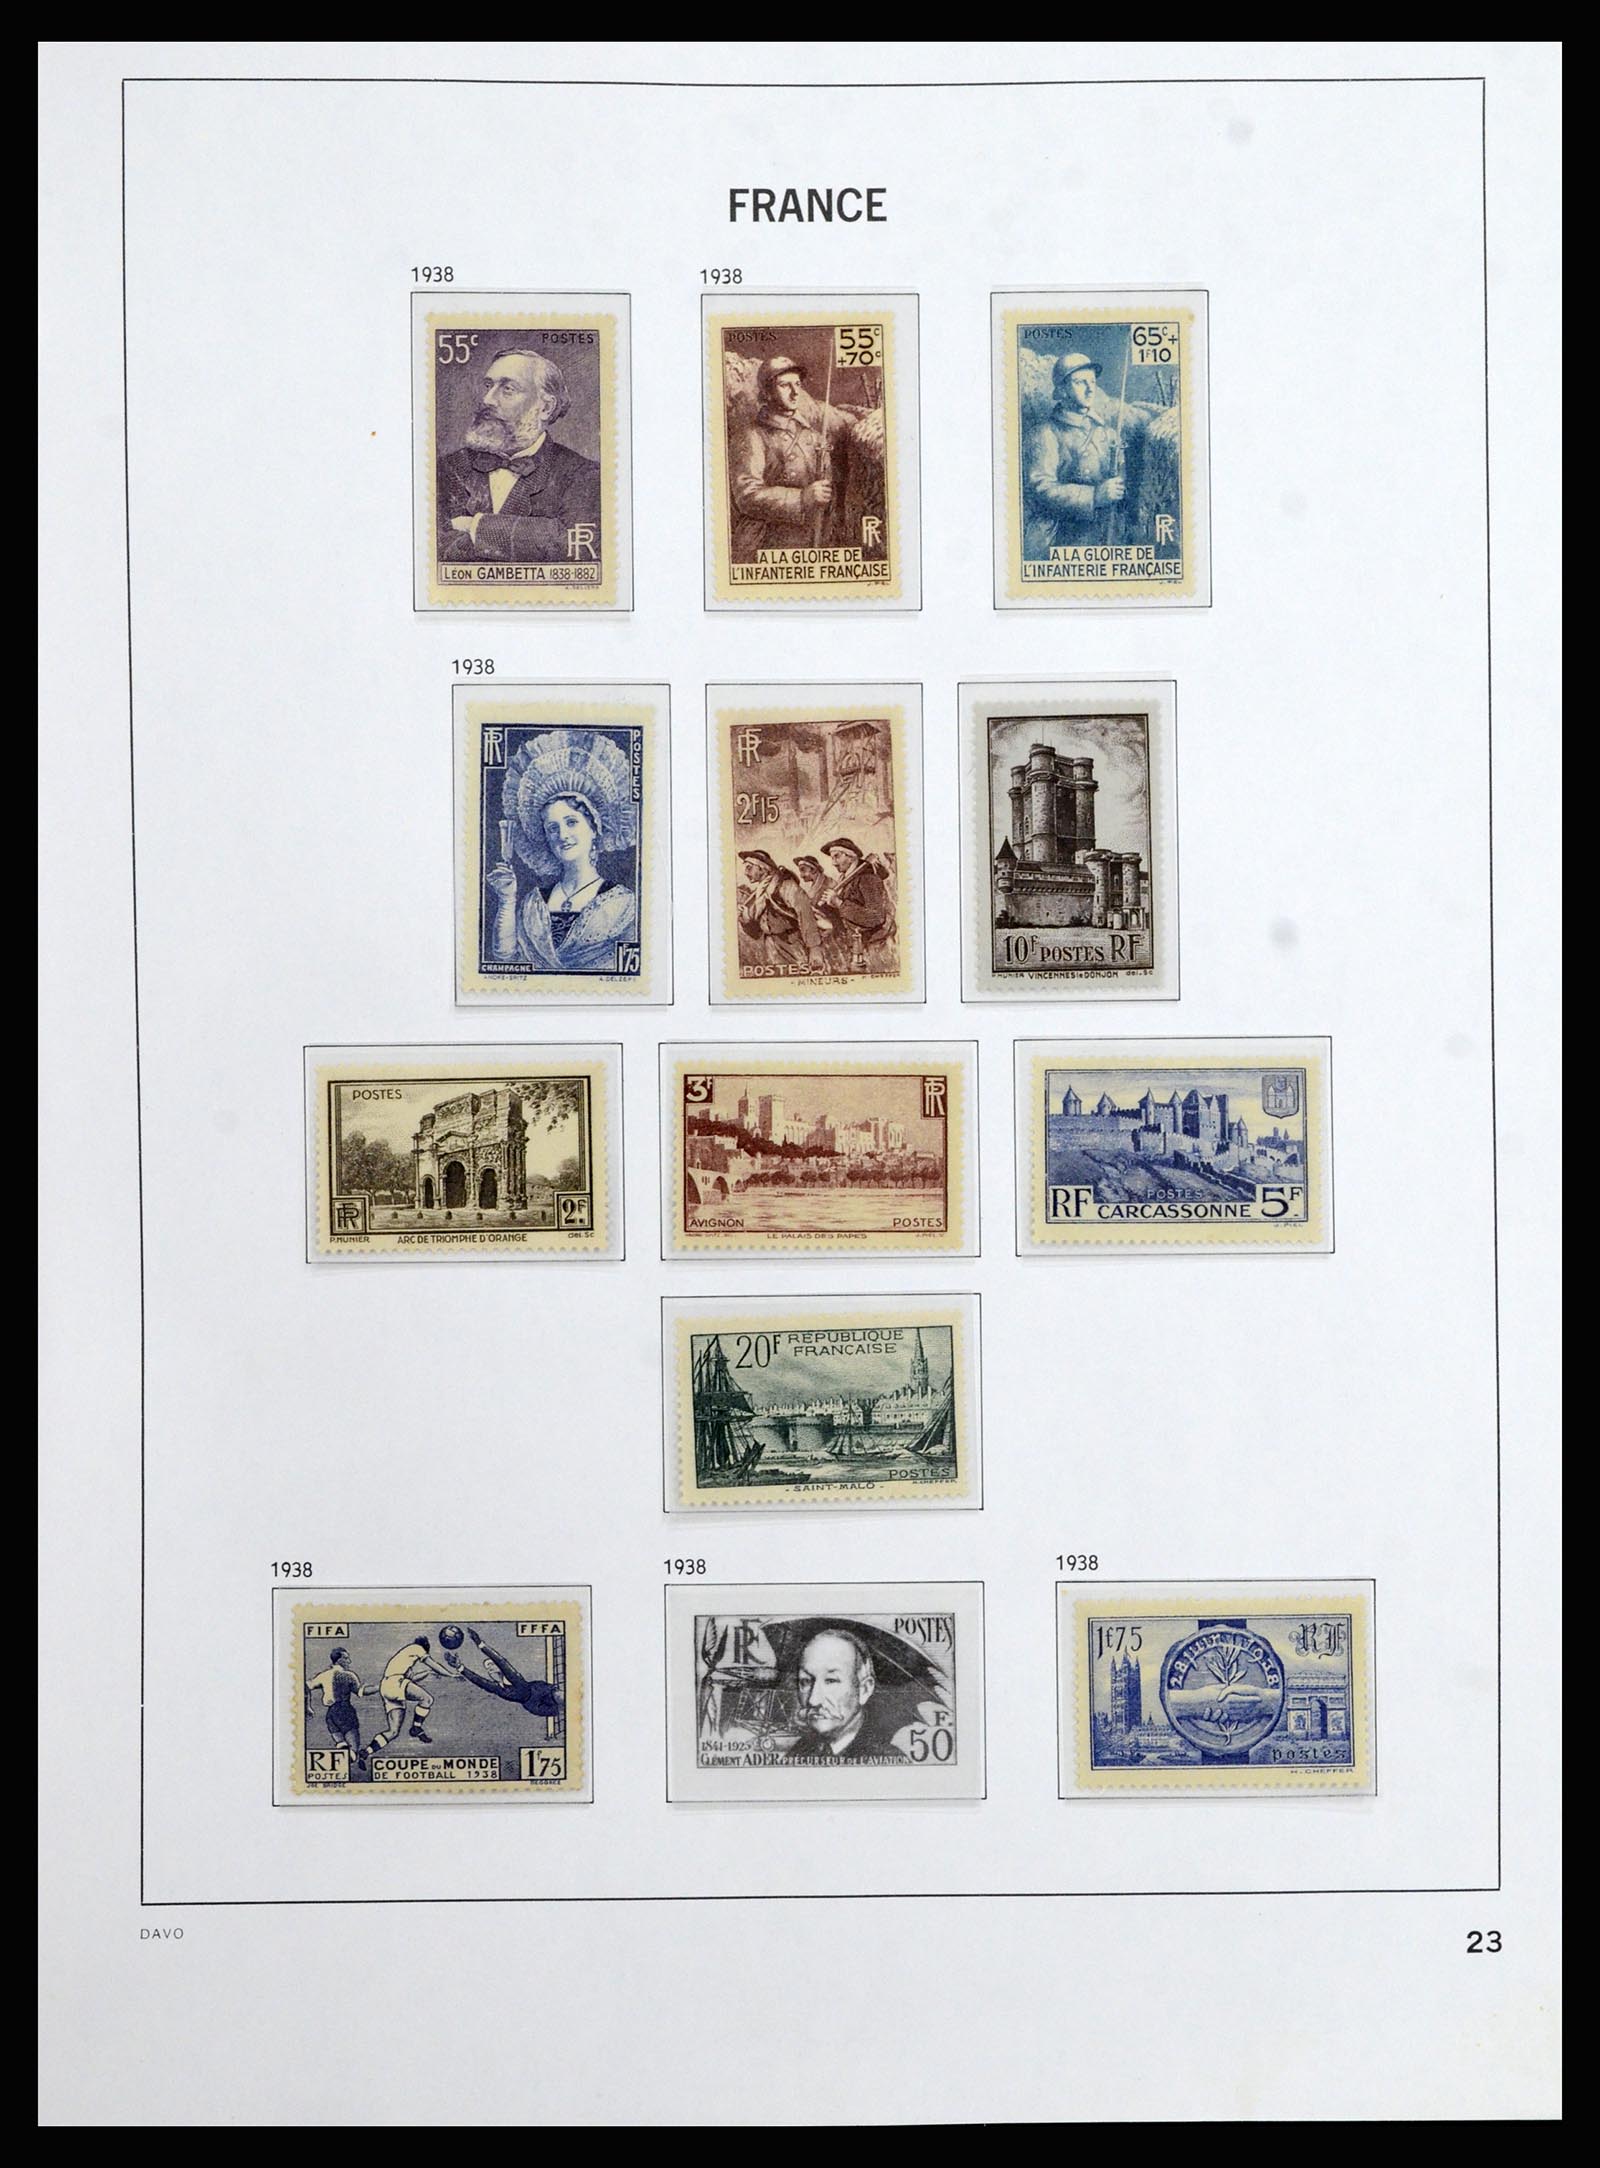 37089 022 - Stamp collection 37089 France 1863-2002.